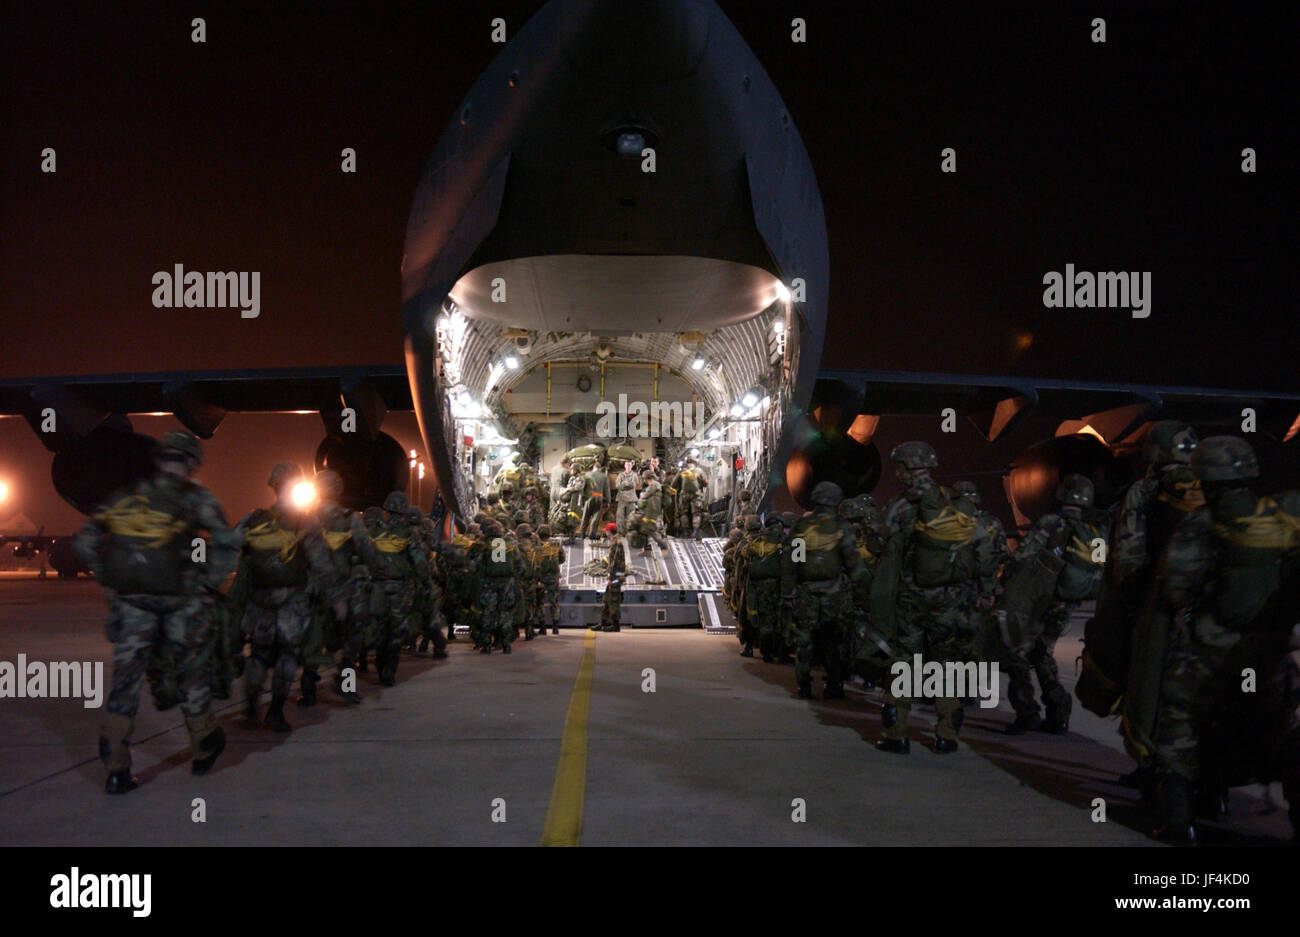 060124-F-0929W-177  Paratroopers from the U.S. Army's 82nd Airborne Division line up to board a U.S. Air Force C-17 Globemaster III aircraft for a night parachute jump during joint forcible entry exercise at Pope Air Force Base, N.C., on Jan. 24, 2006.  The 82nd is from nearby Fort Bragg, N.C.  DoD photo by Tech. Sgt Sean M. Worrell, U.S. Air Force.  (Released) Stock Photo